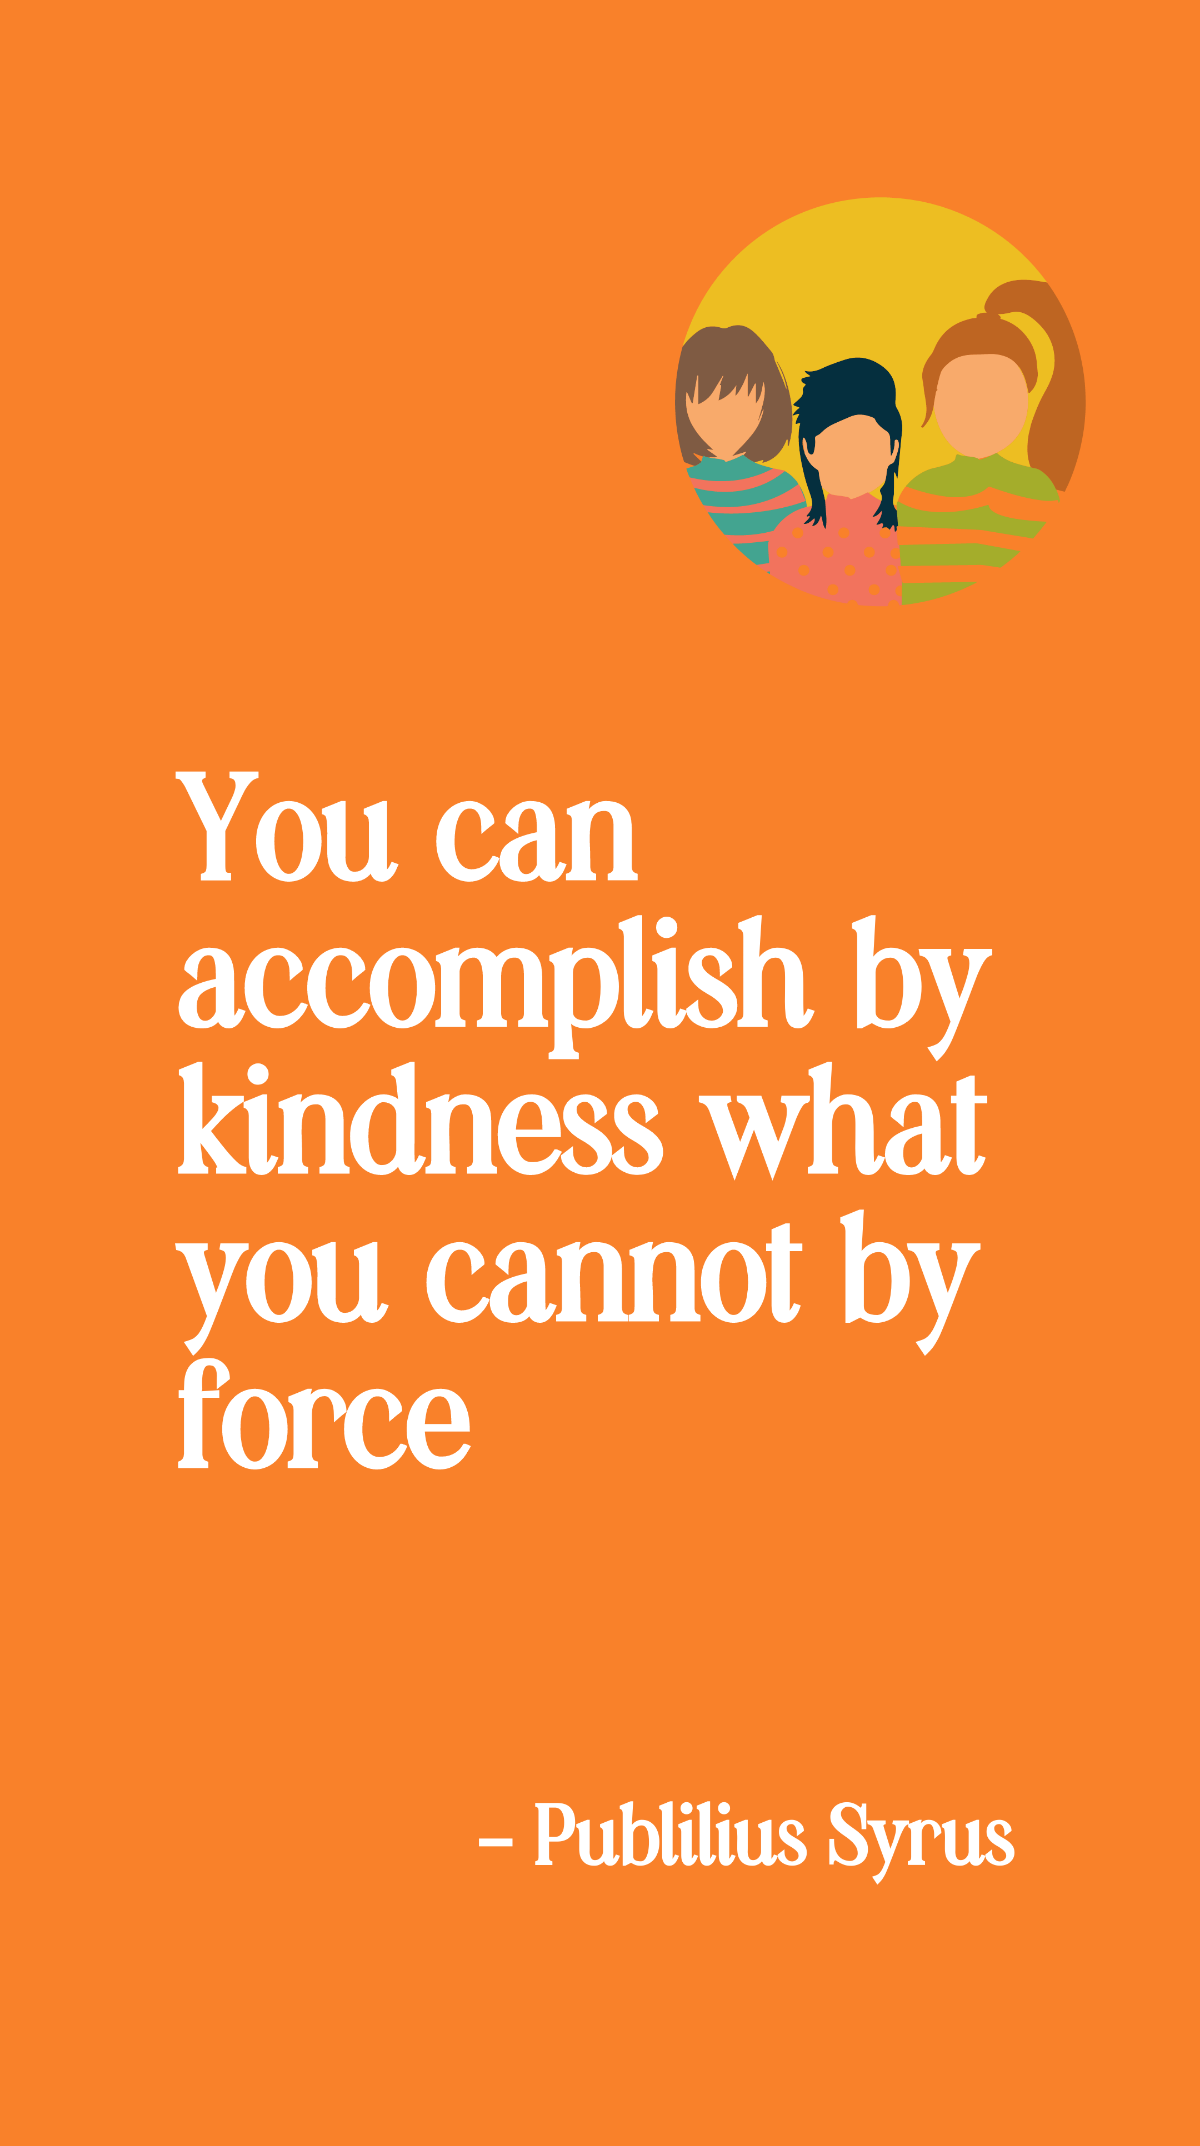 Publilius Syrus - You can accomplish by kindness what you cannot by force